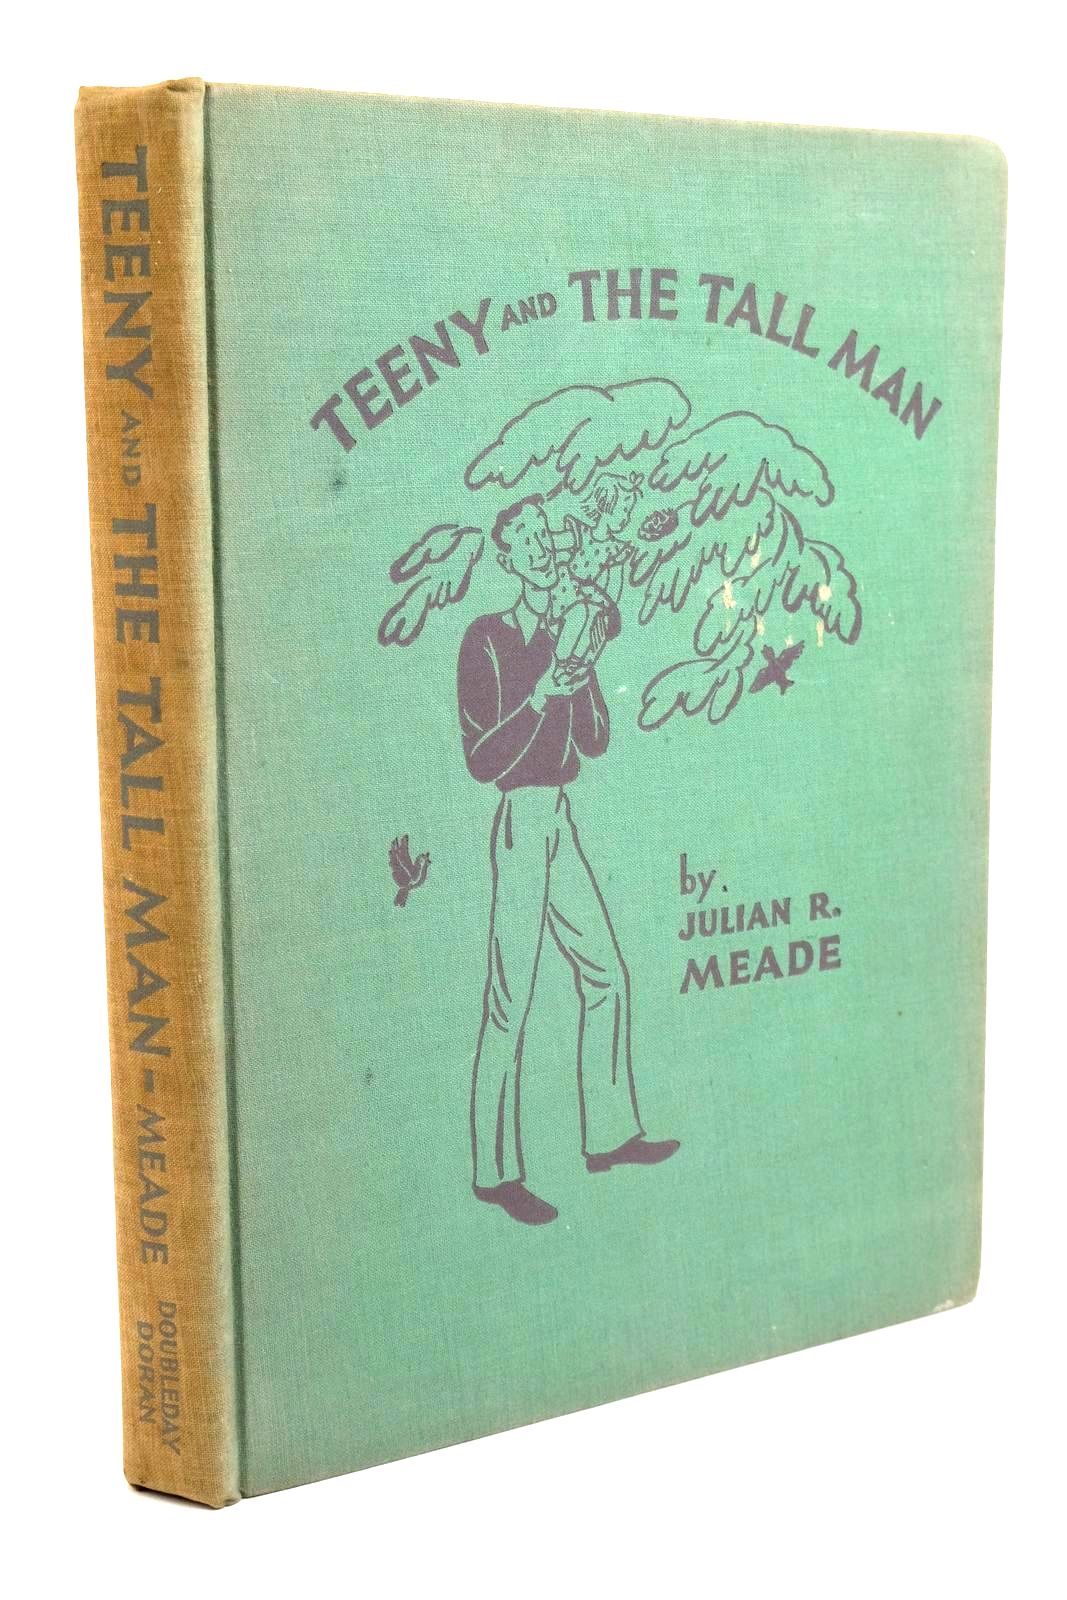 Photo of TEENY AND THE TALL MAN written by Meade, Julian R. illustrated by Paull, Grace published by Doubleday, Doran &amp; Company Inc. (STOCK CODE: 1321673)  for sale by Stella & Rose's Books